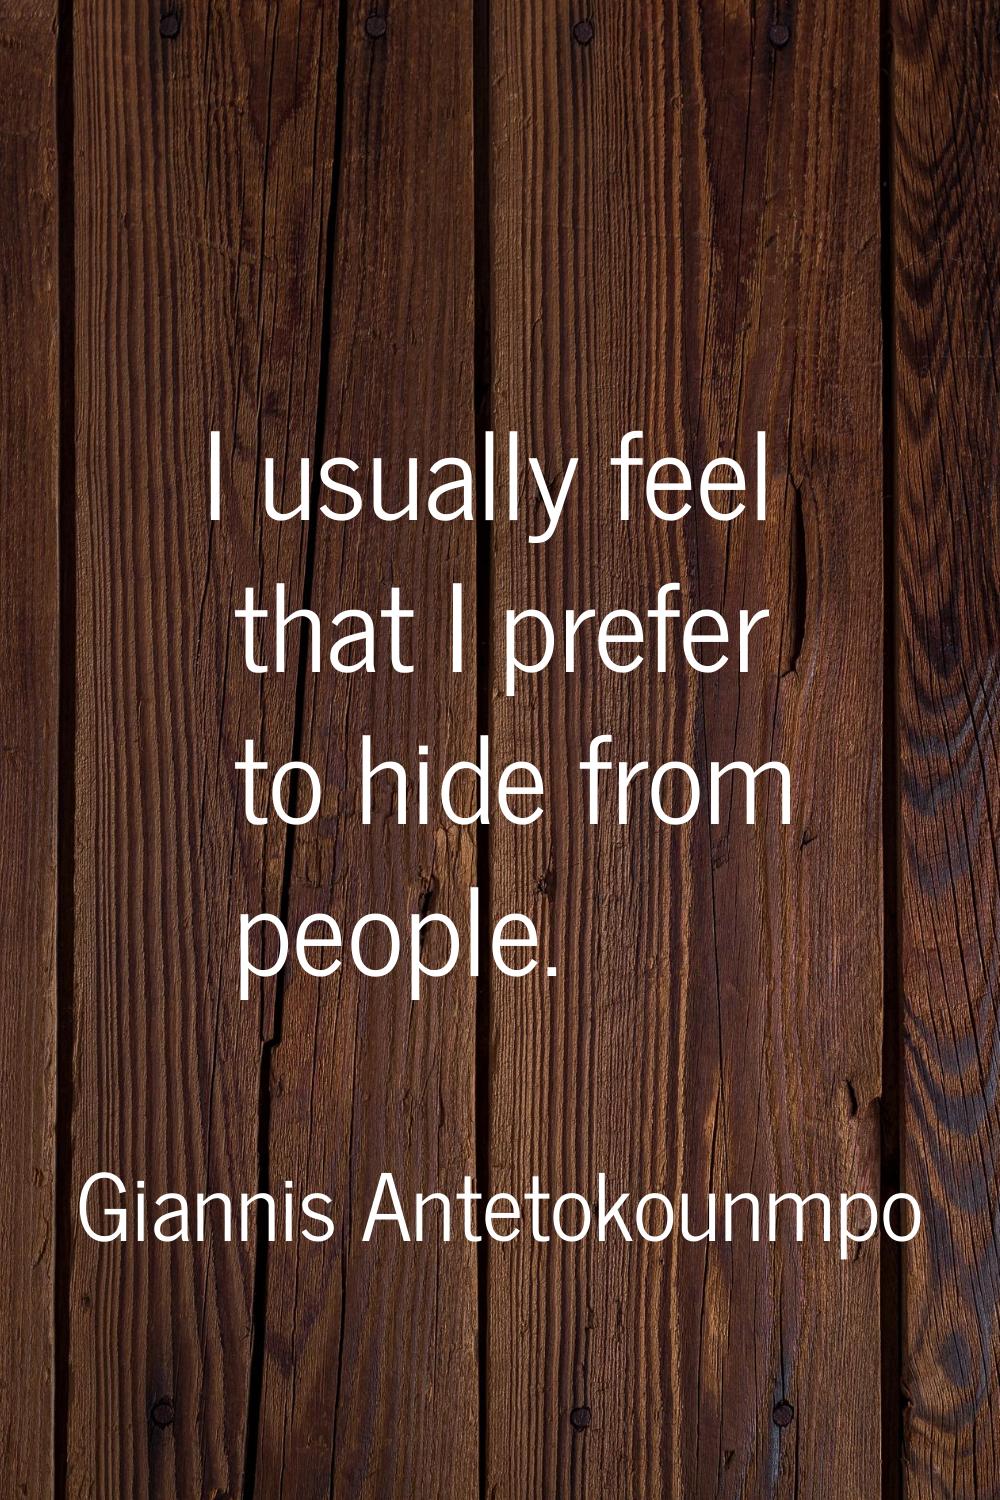 I usually feel that I prefer to hide from people.